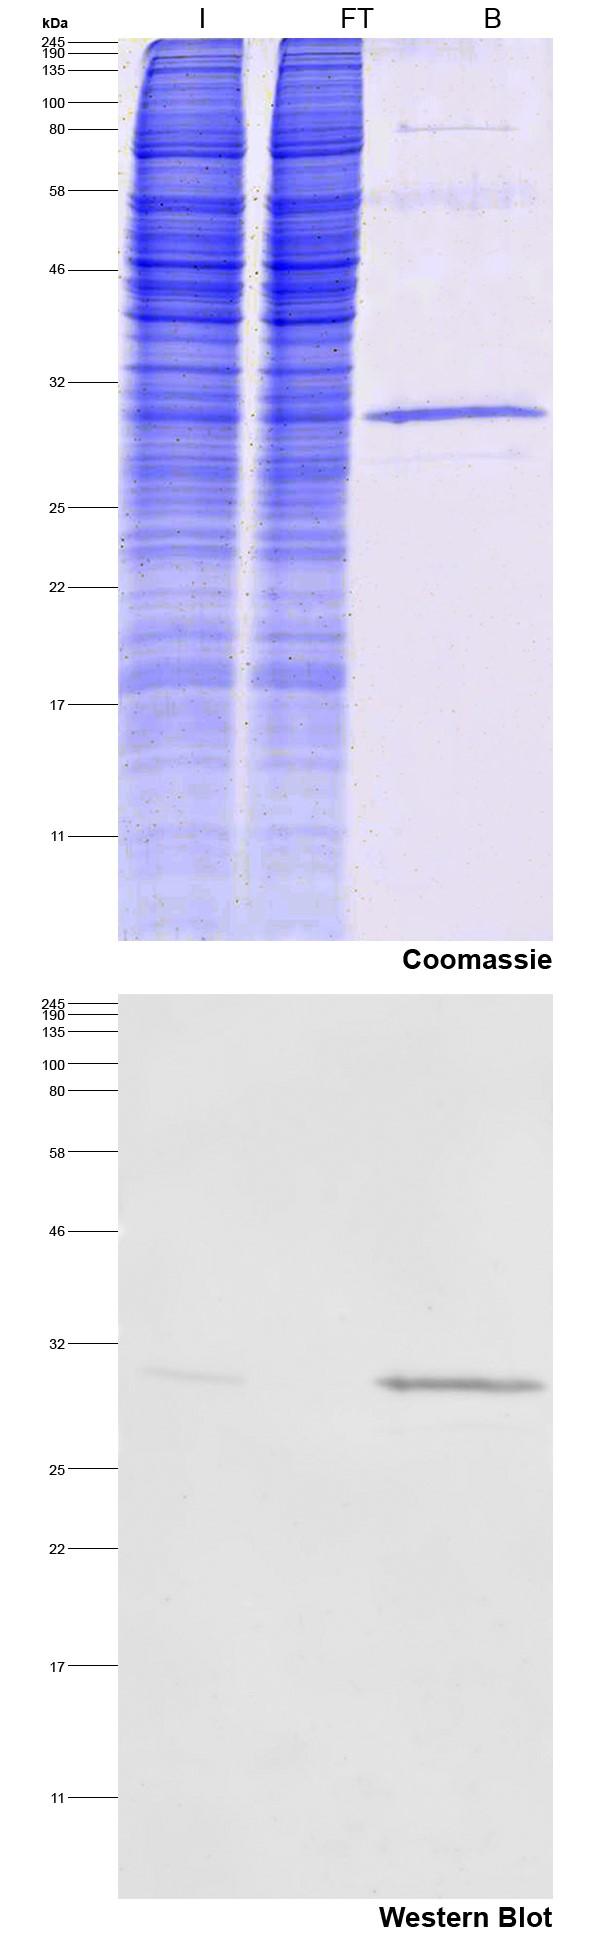 Immunoprecipitation of Spot-tagged protein. Input (I), non-bound (FT) and bound (B), Coomassie staining and Western blotting. Western blot indicates high effectivity.